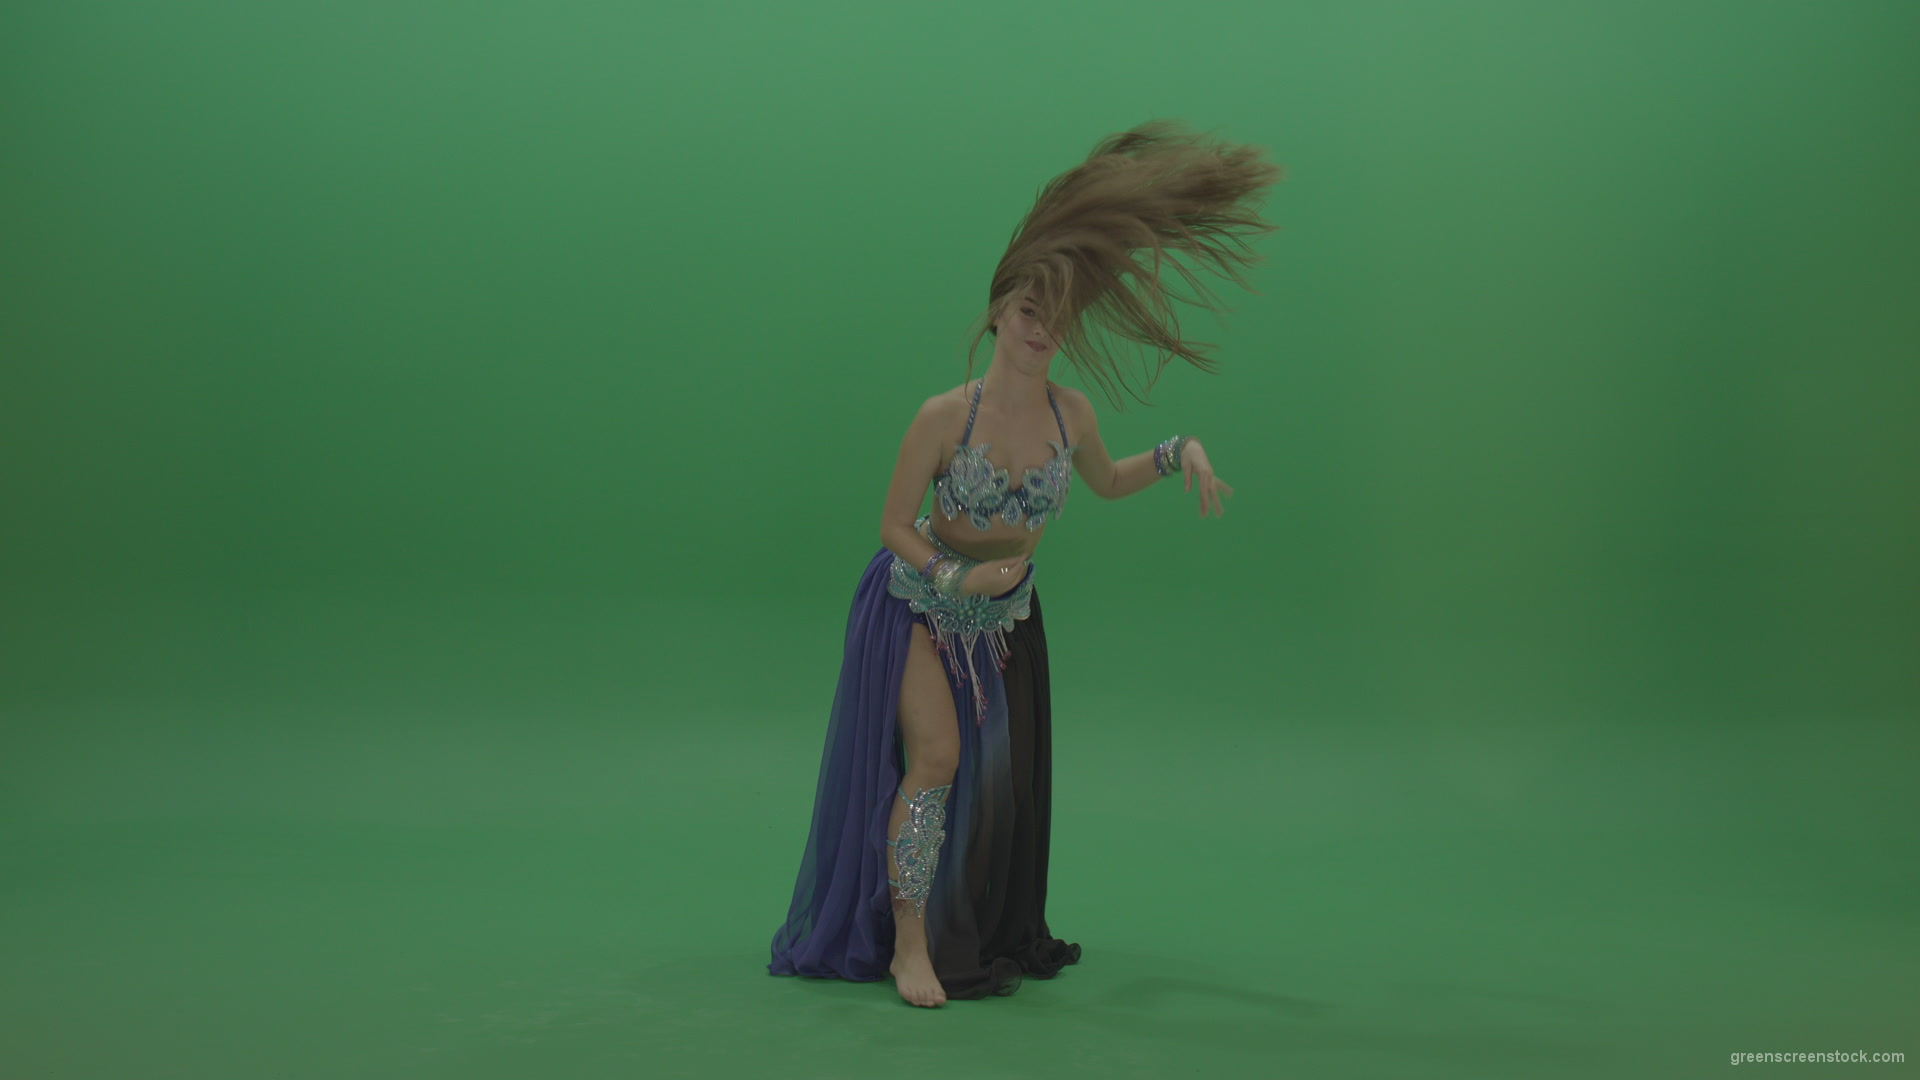 Foxy-belly-dancer-in-purple-and-black-wear-display-amazing-dance-moves-over-chromakey-background_006 Green Screen Stock